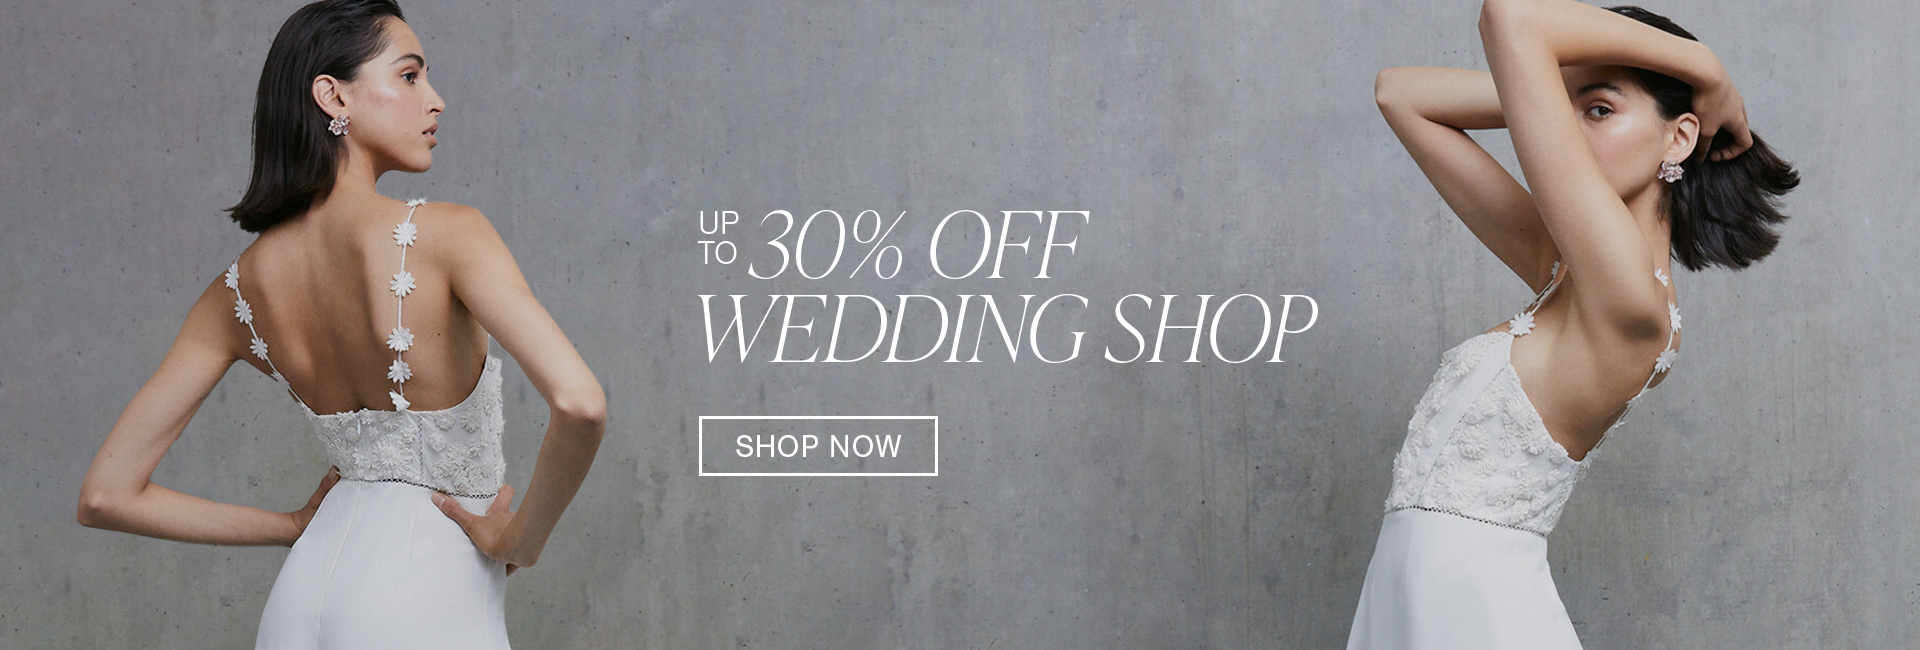 UP TO 30% OFF WEDDING SHOP